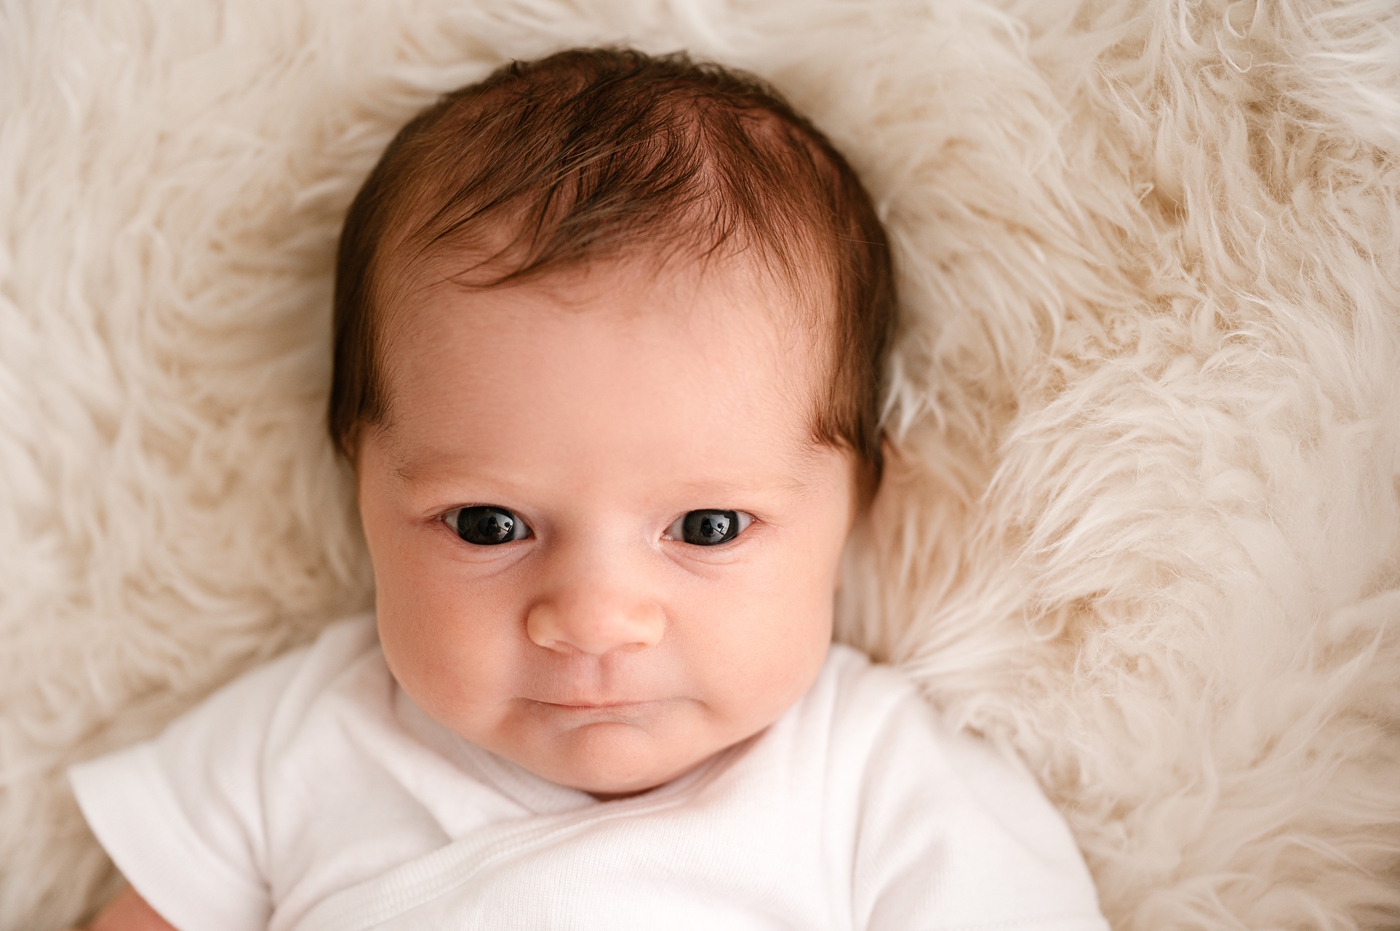 Baby girl looks wide eyed while having portrait taken. Image by Meg Newton Photography.